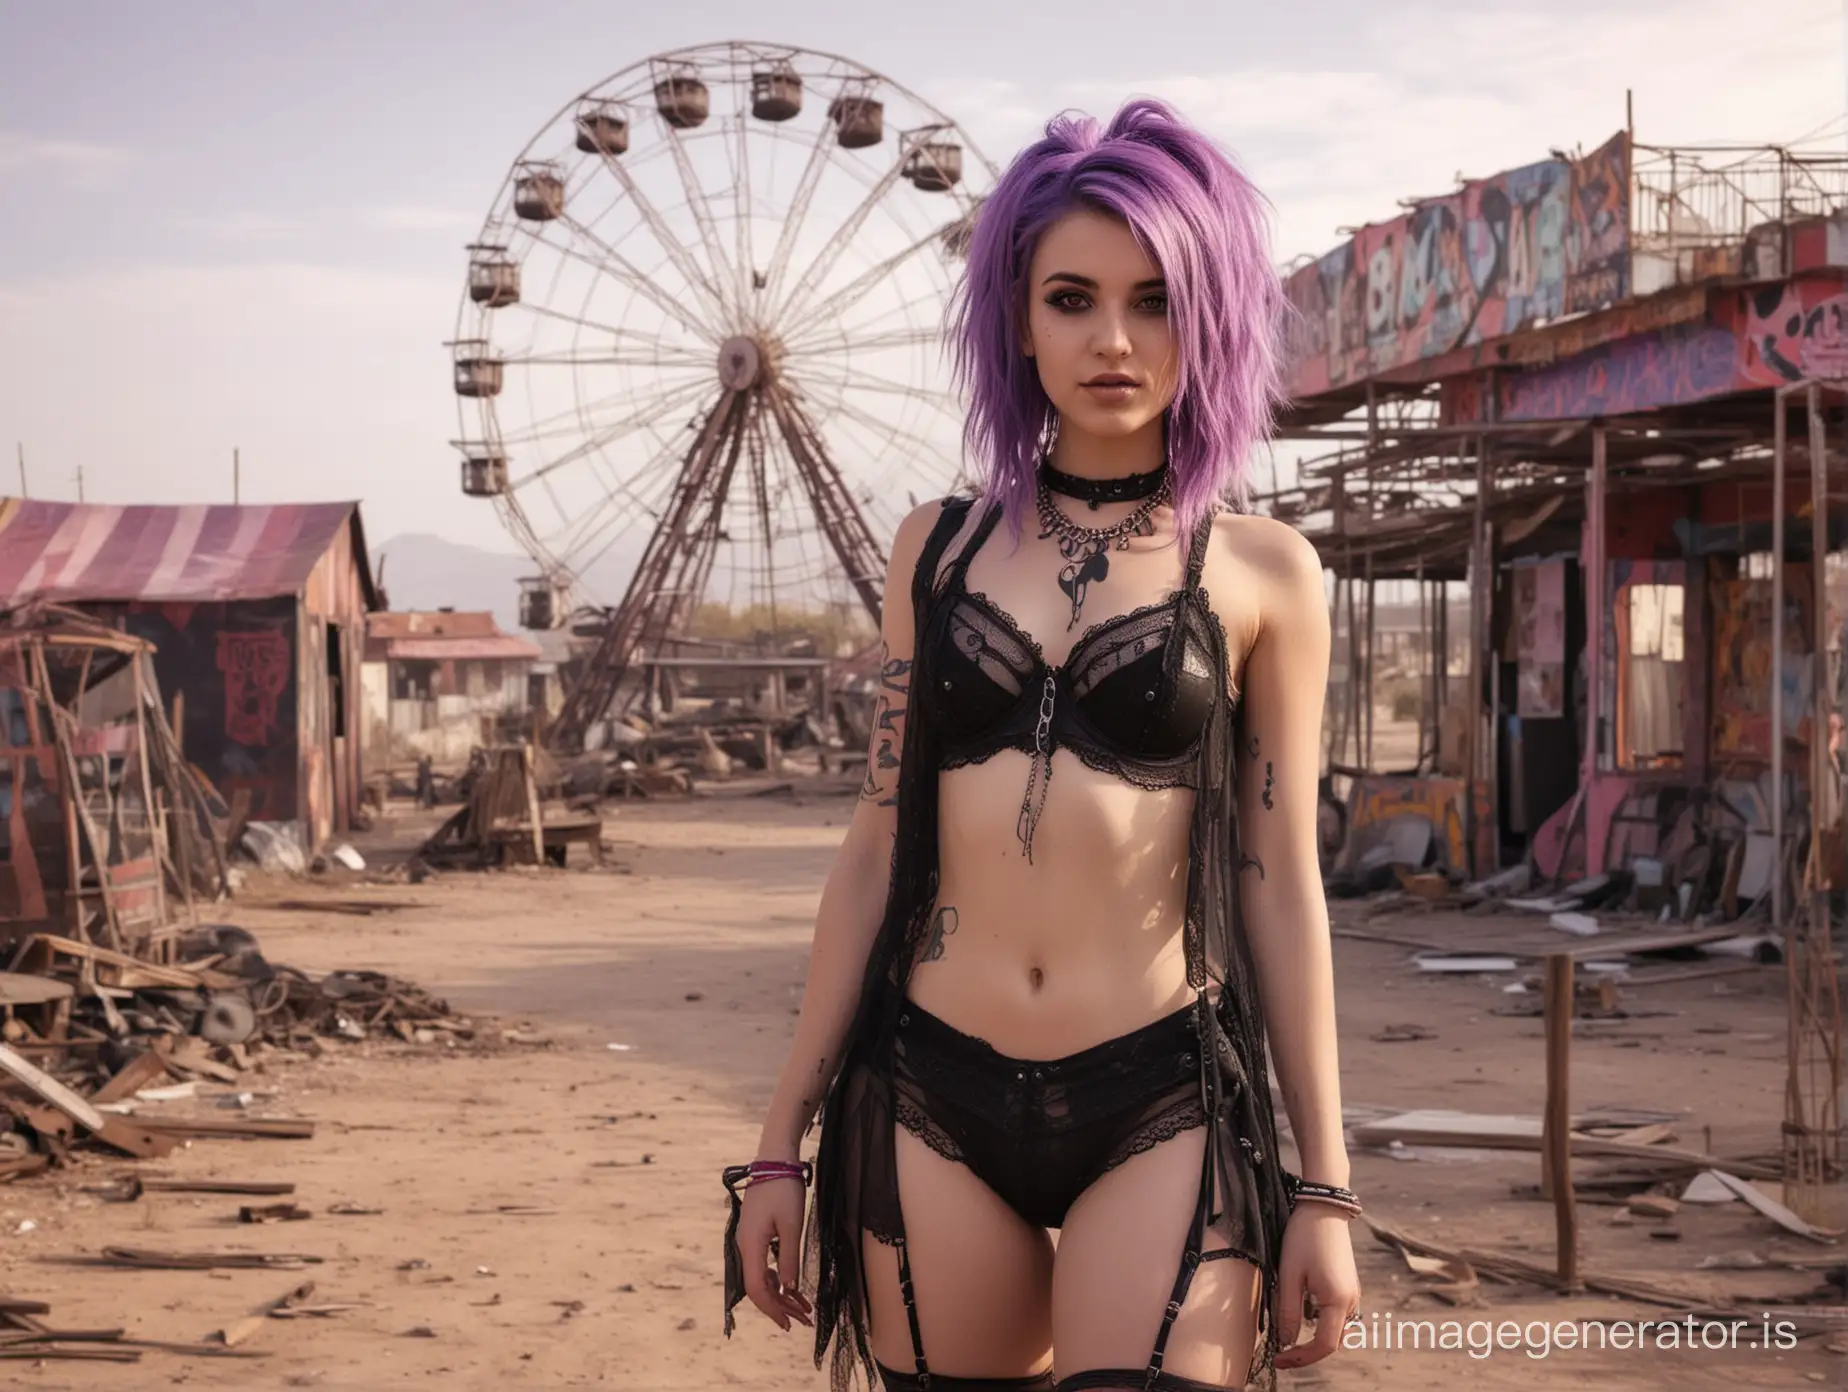 No pink or purple in the background. mysterious young goth girl wearing very revealing slutty sheer pink clothing, black and purple hair. Cheeky smile. In an abandoned carnival in the middle of the desert, like in the series "Carnivale". Big broken-down machines, in rusty metal colors, lie behind her, Abandoned. No pink or purple in the background, only brown and metal. There is no sign of people or civilization. Natural lighting. Dramatic. Full body in picture